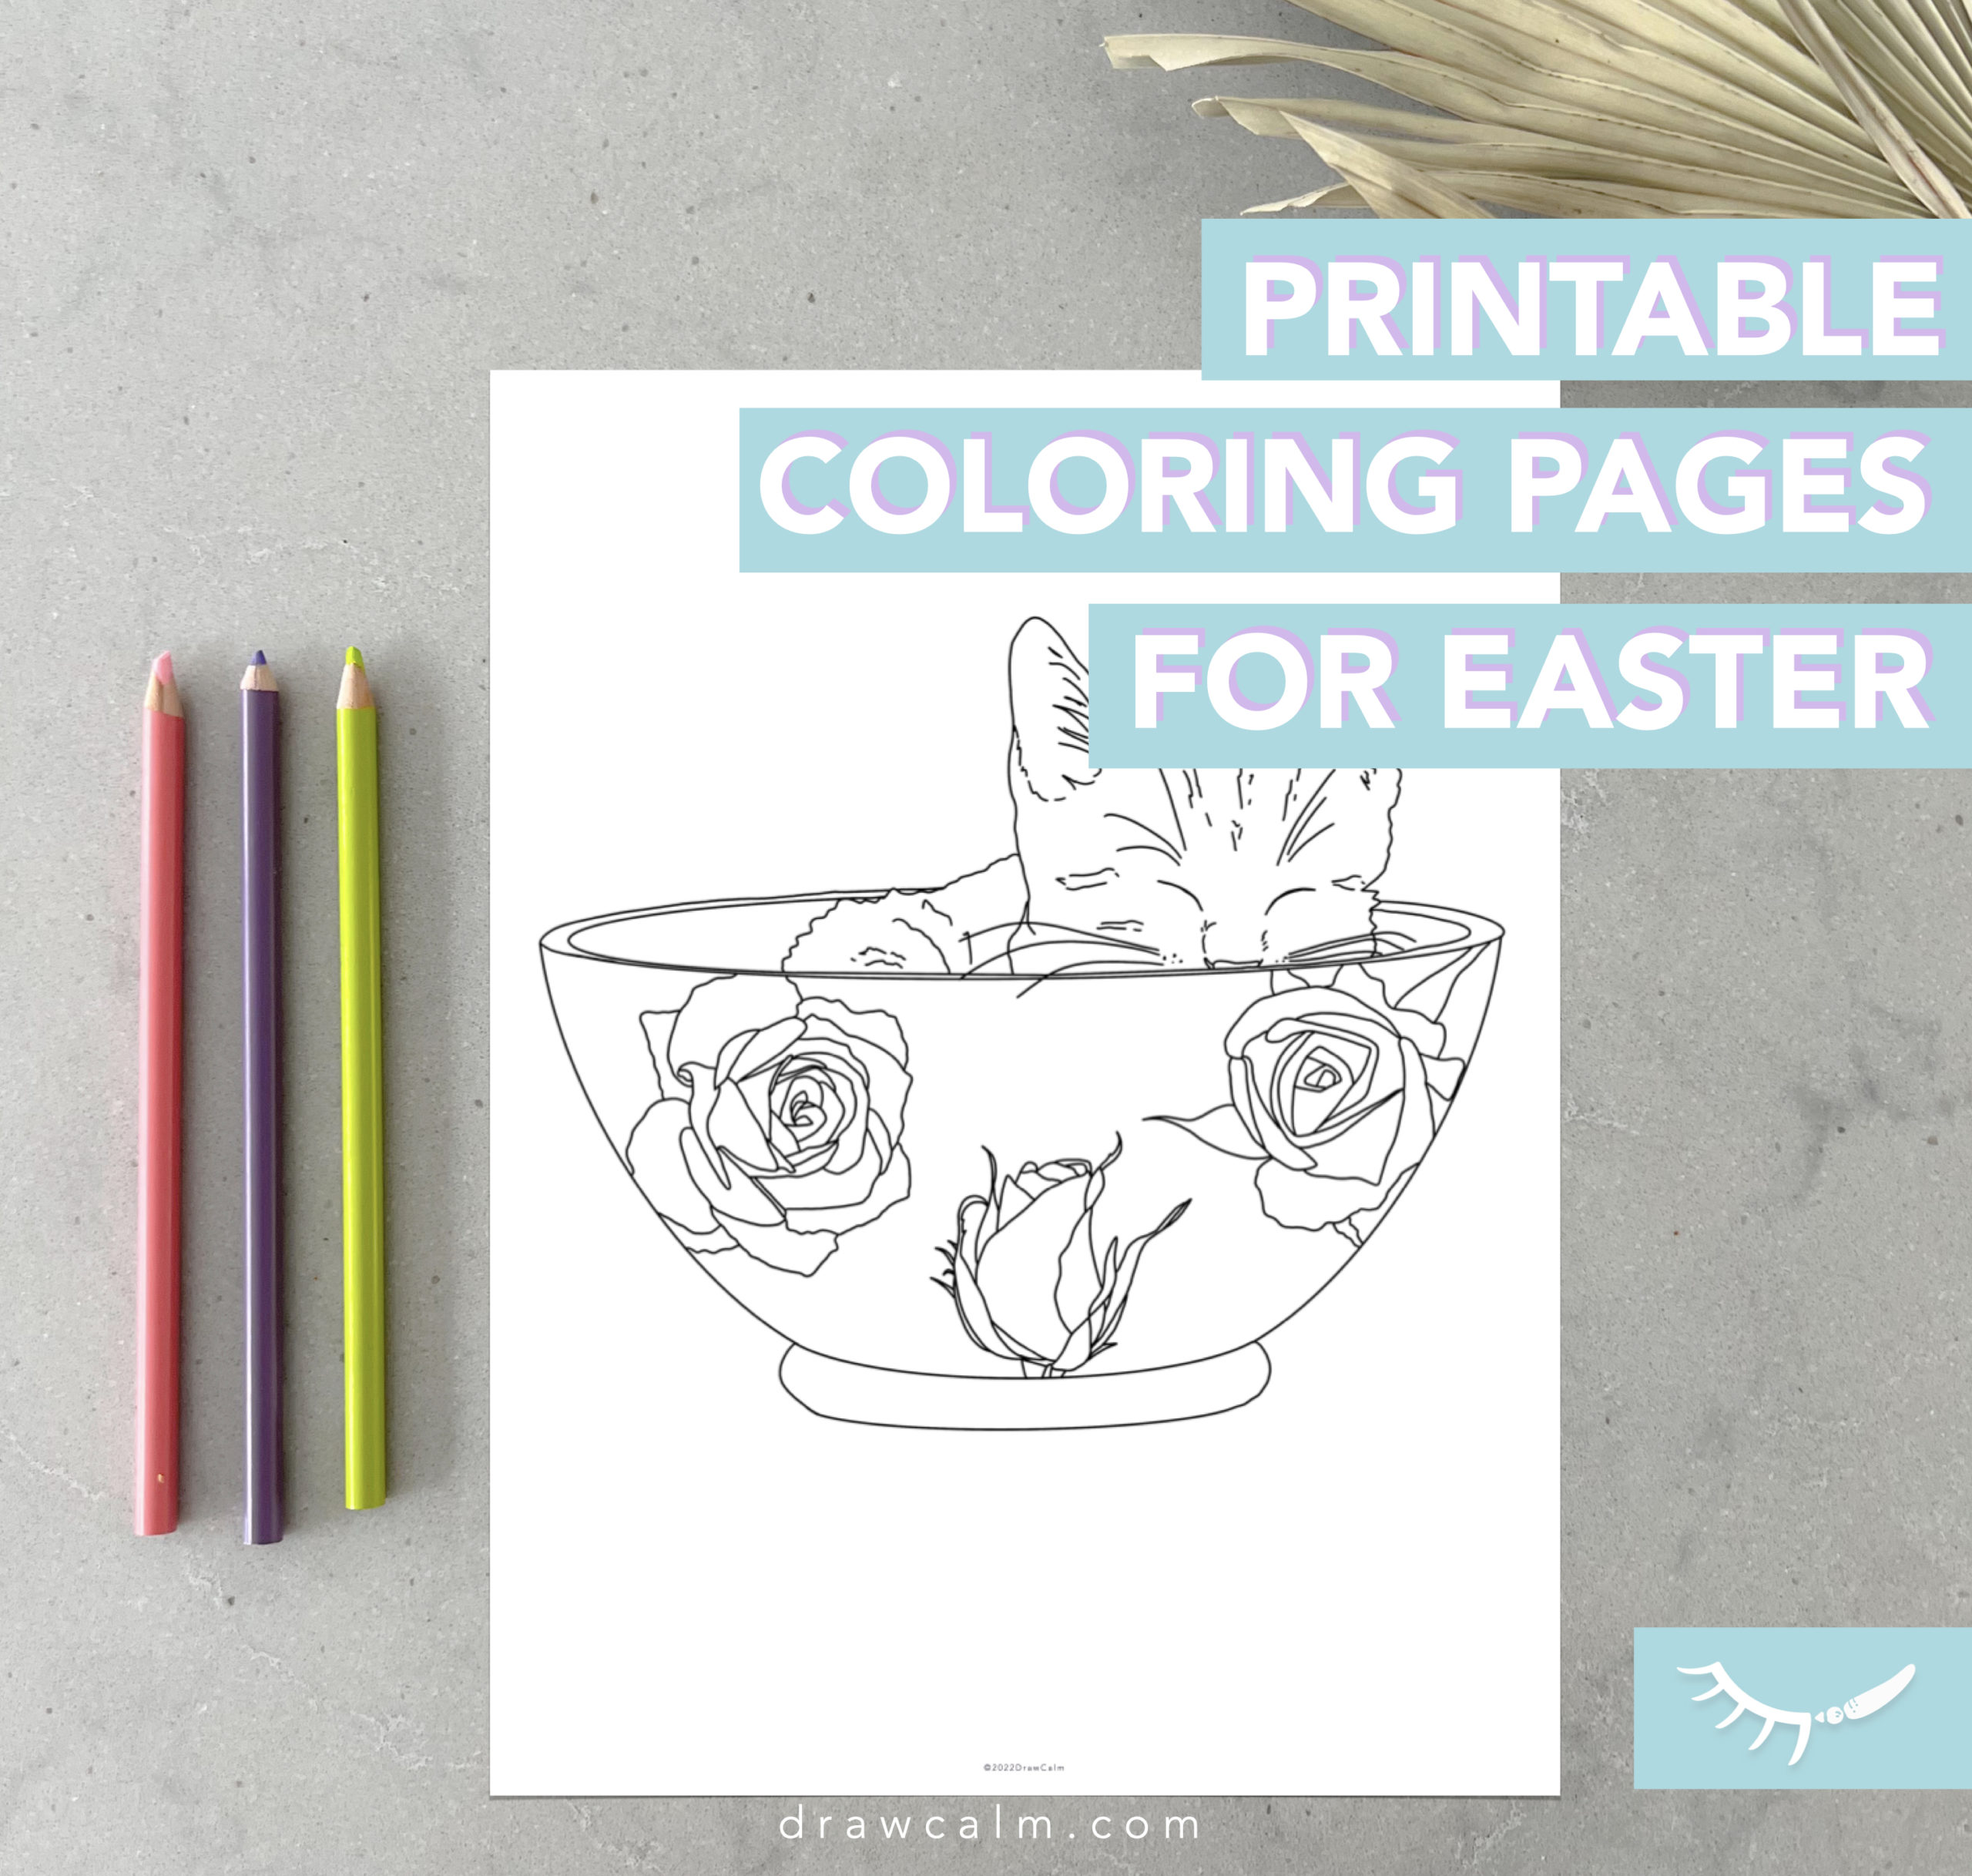 Printable coloring pages for easter. This one shows a kitten sleeping in a bowl with a rose pattern.